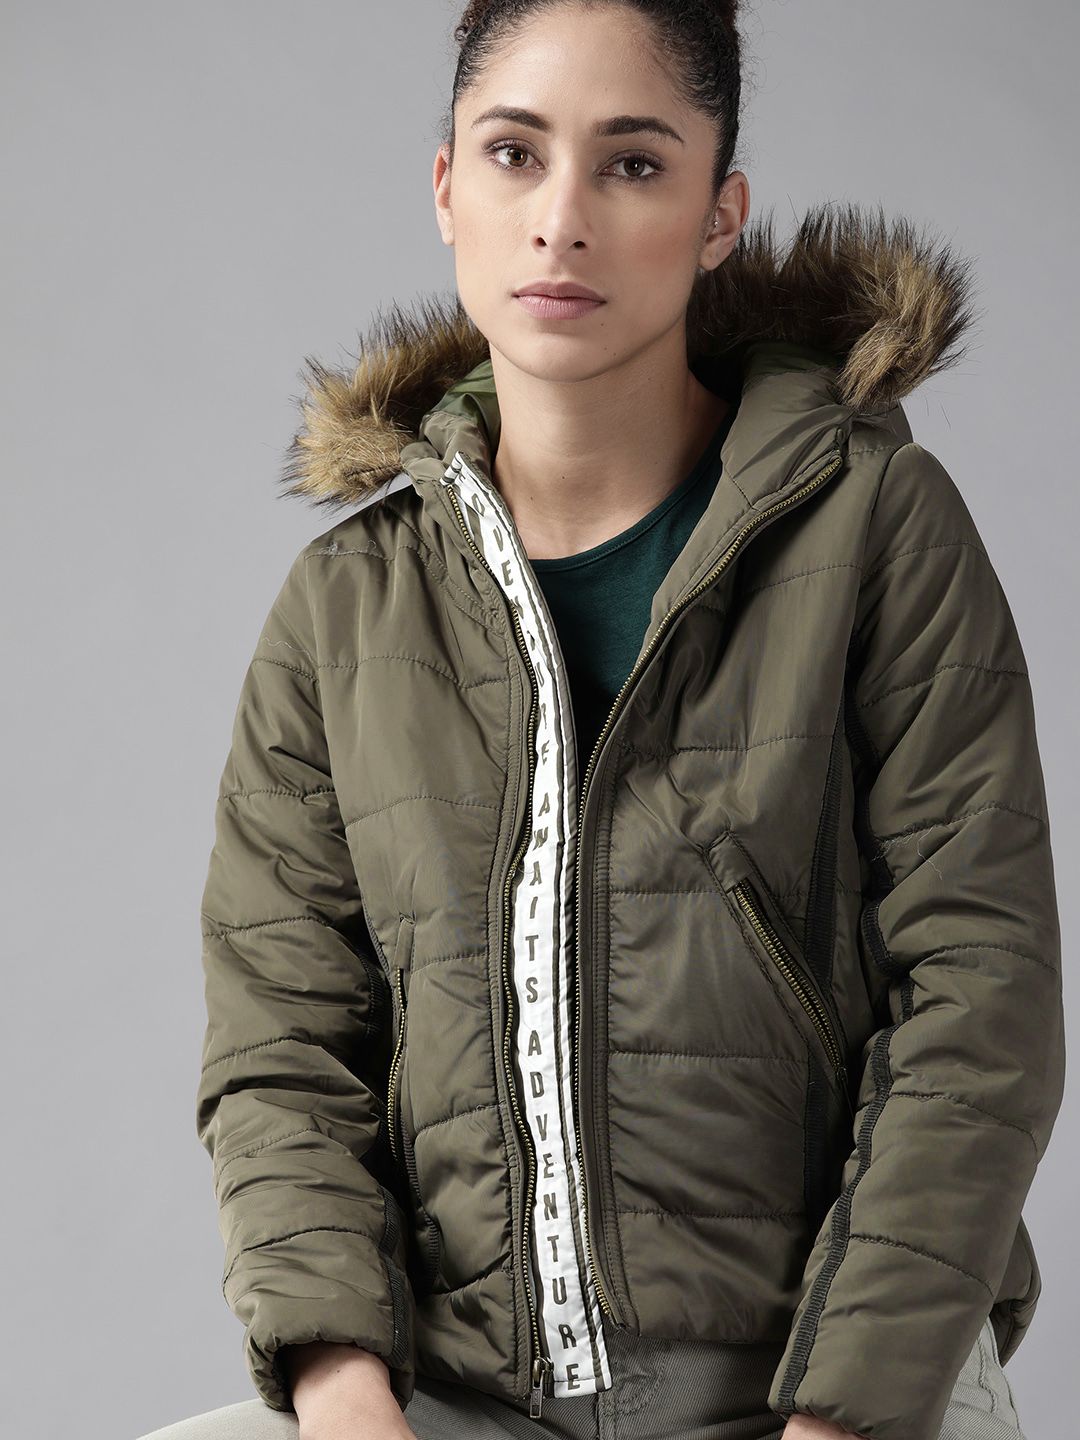 Roadster Women Olive Green Parka Jacket Price in India